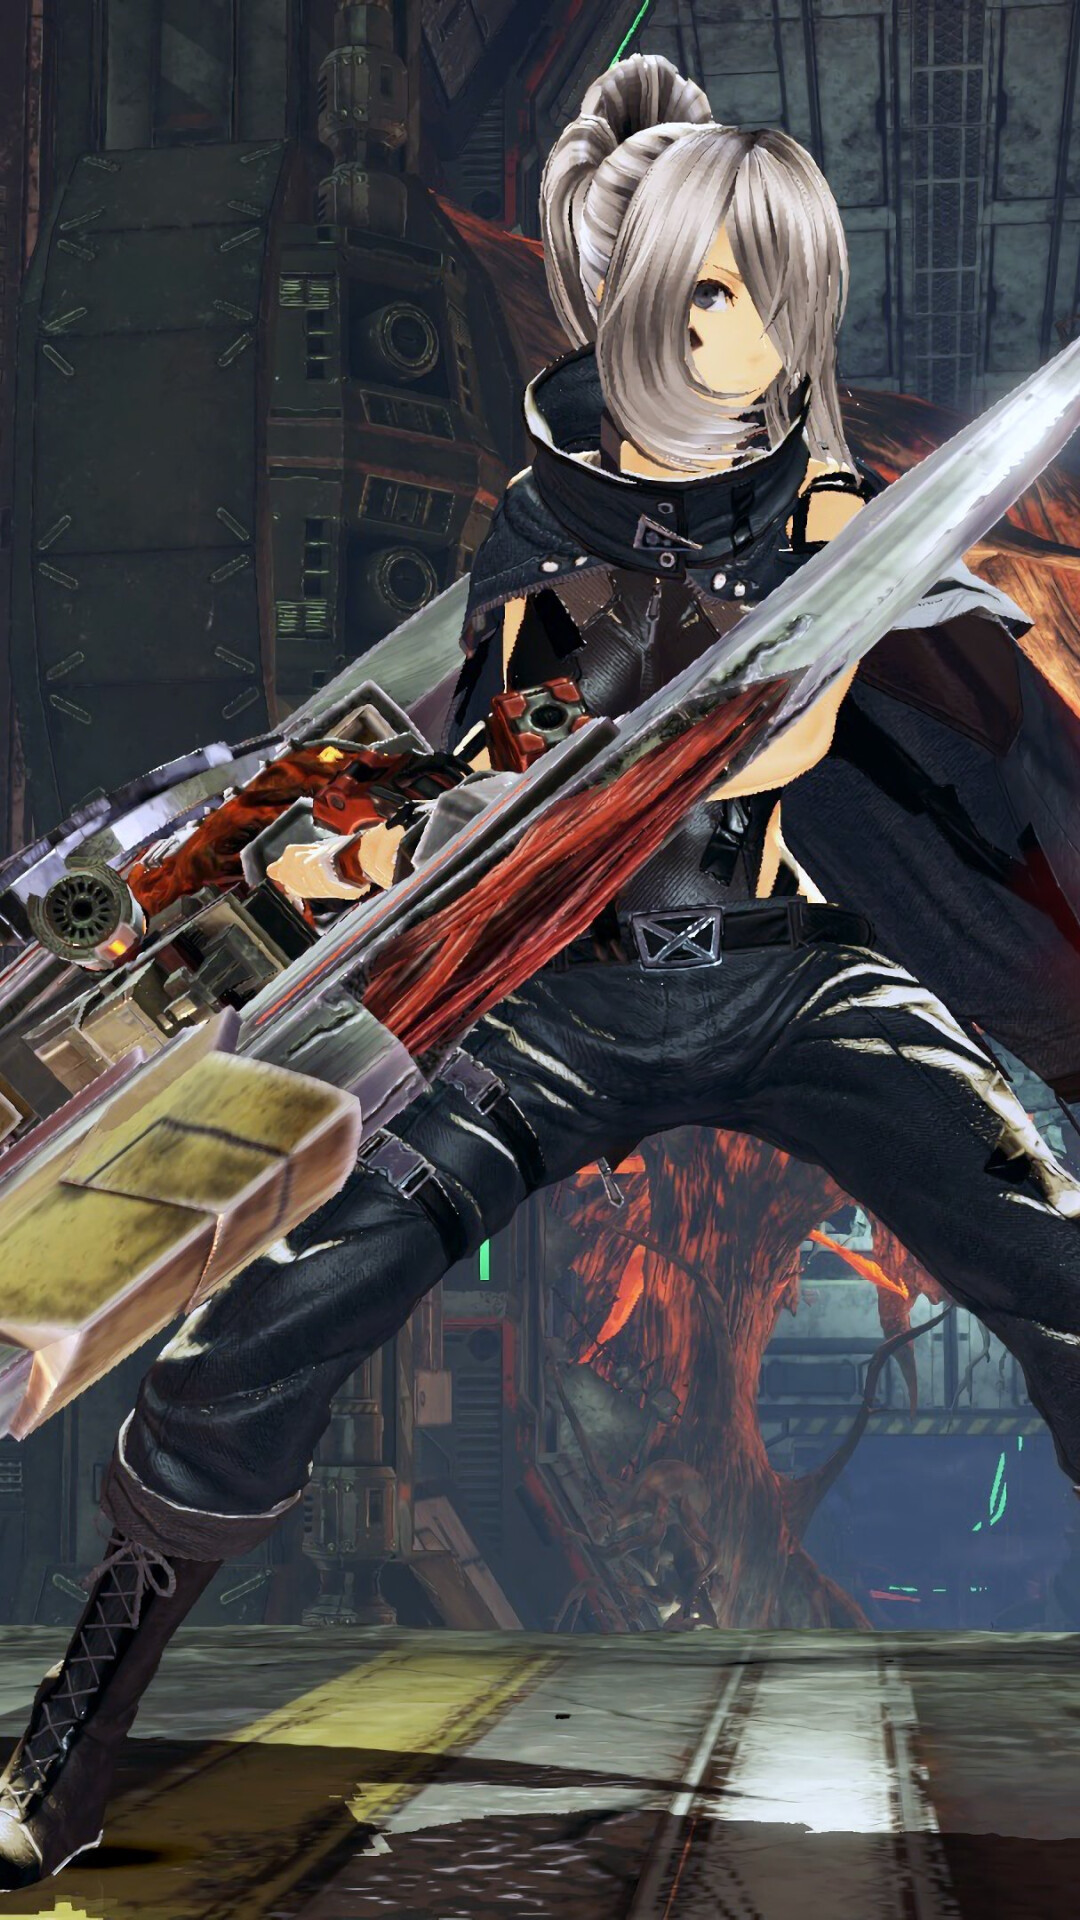 God Eater (Game): The series that depicts the battle between humanity and omnivorous monsters in a post-apocalyptic world. 1080x1920 Full HD Background.